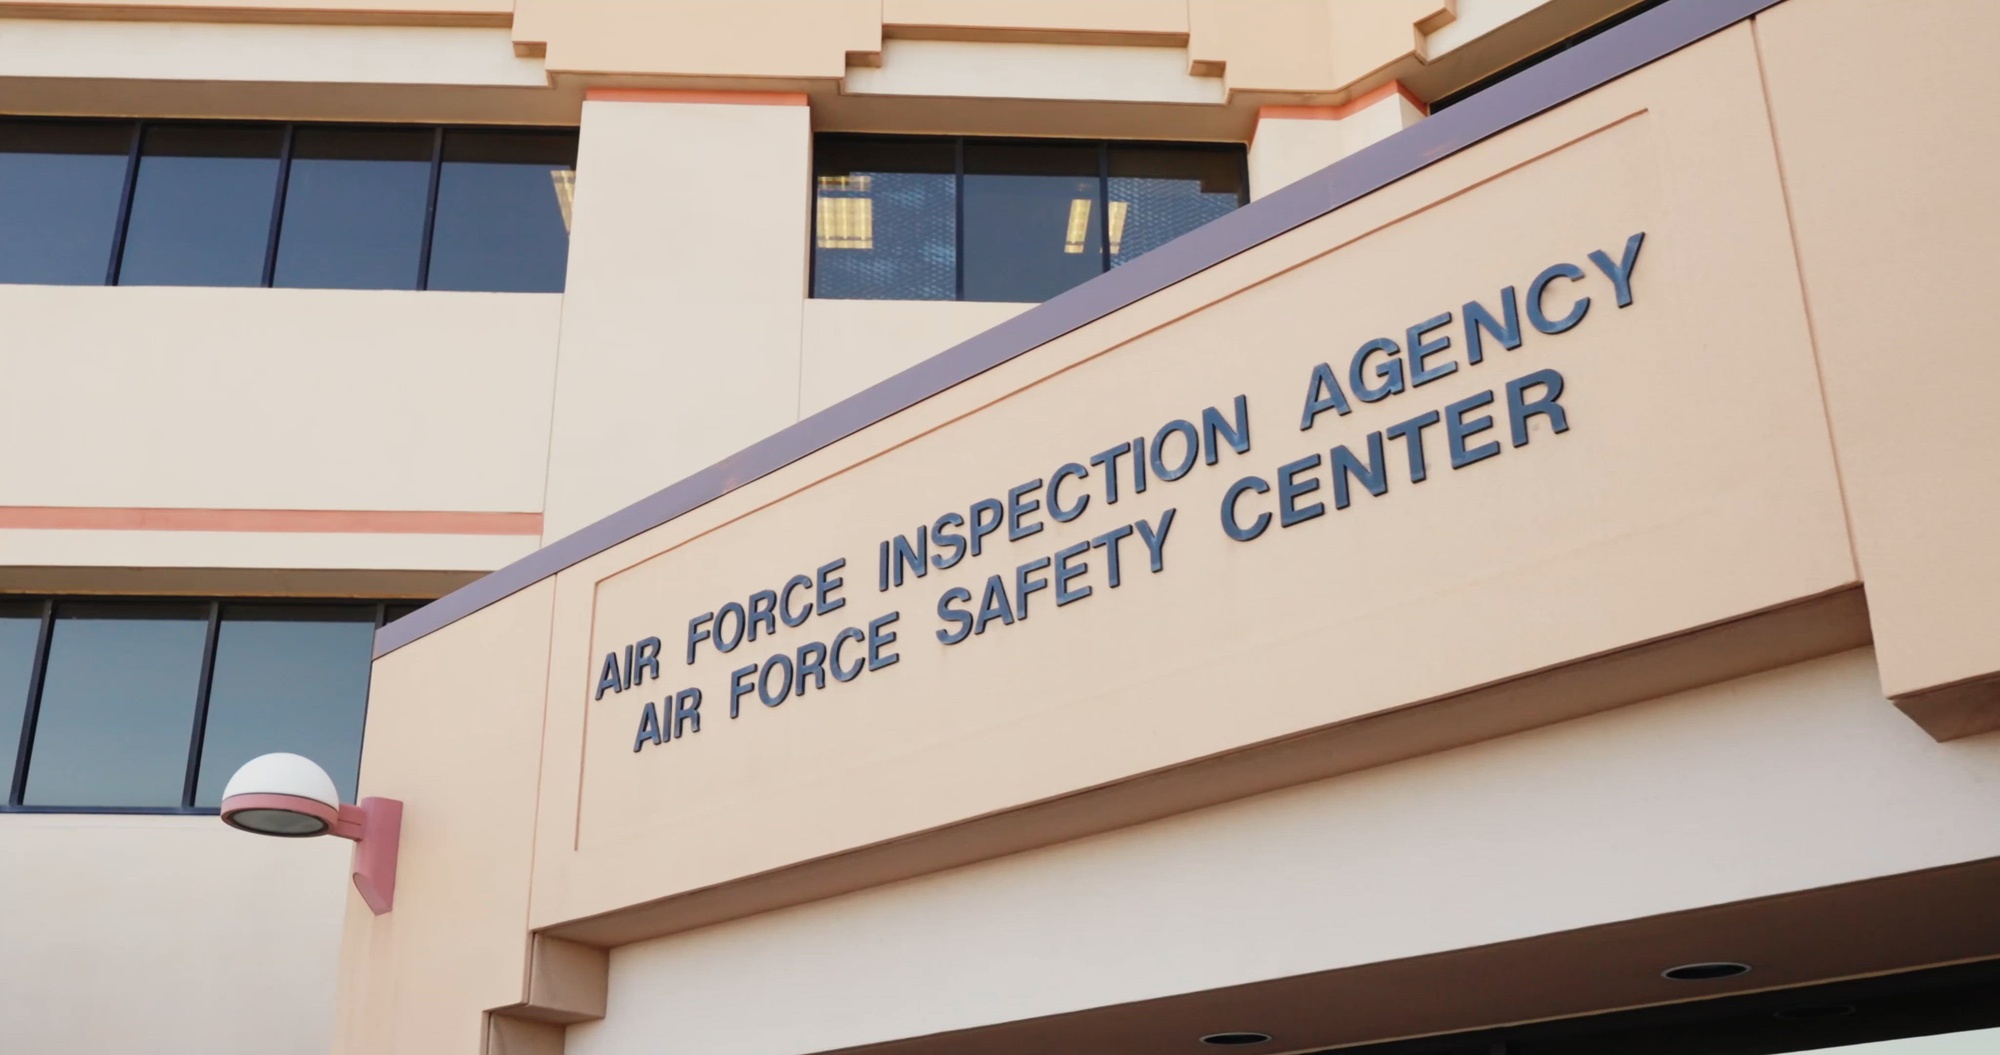 Mission video for the Air Force Safety Center, where we safeguard Airmen and Guardians and protect resources while enabling mission success.